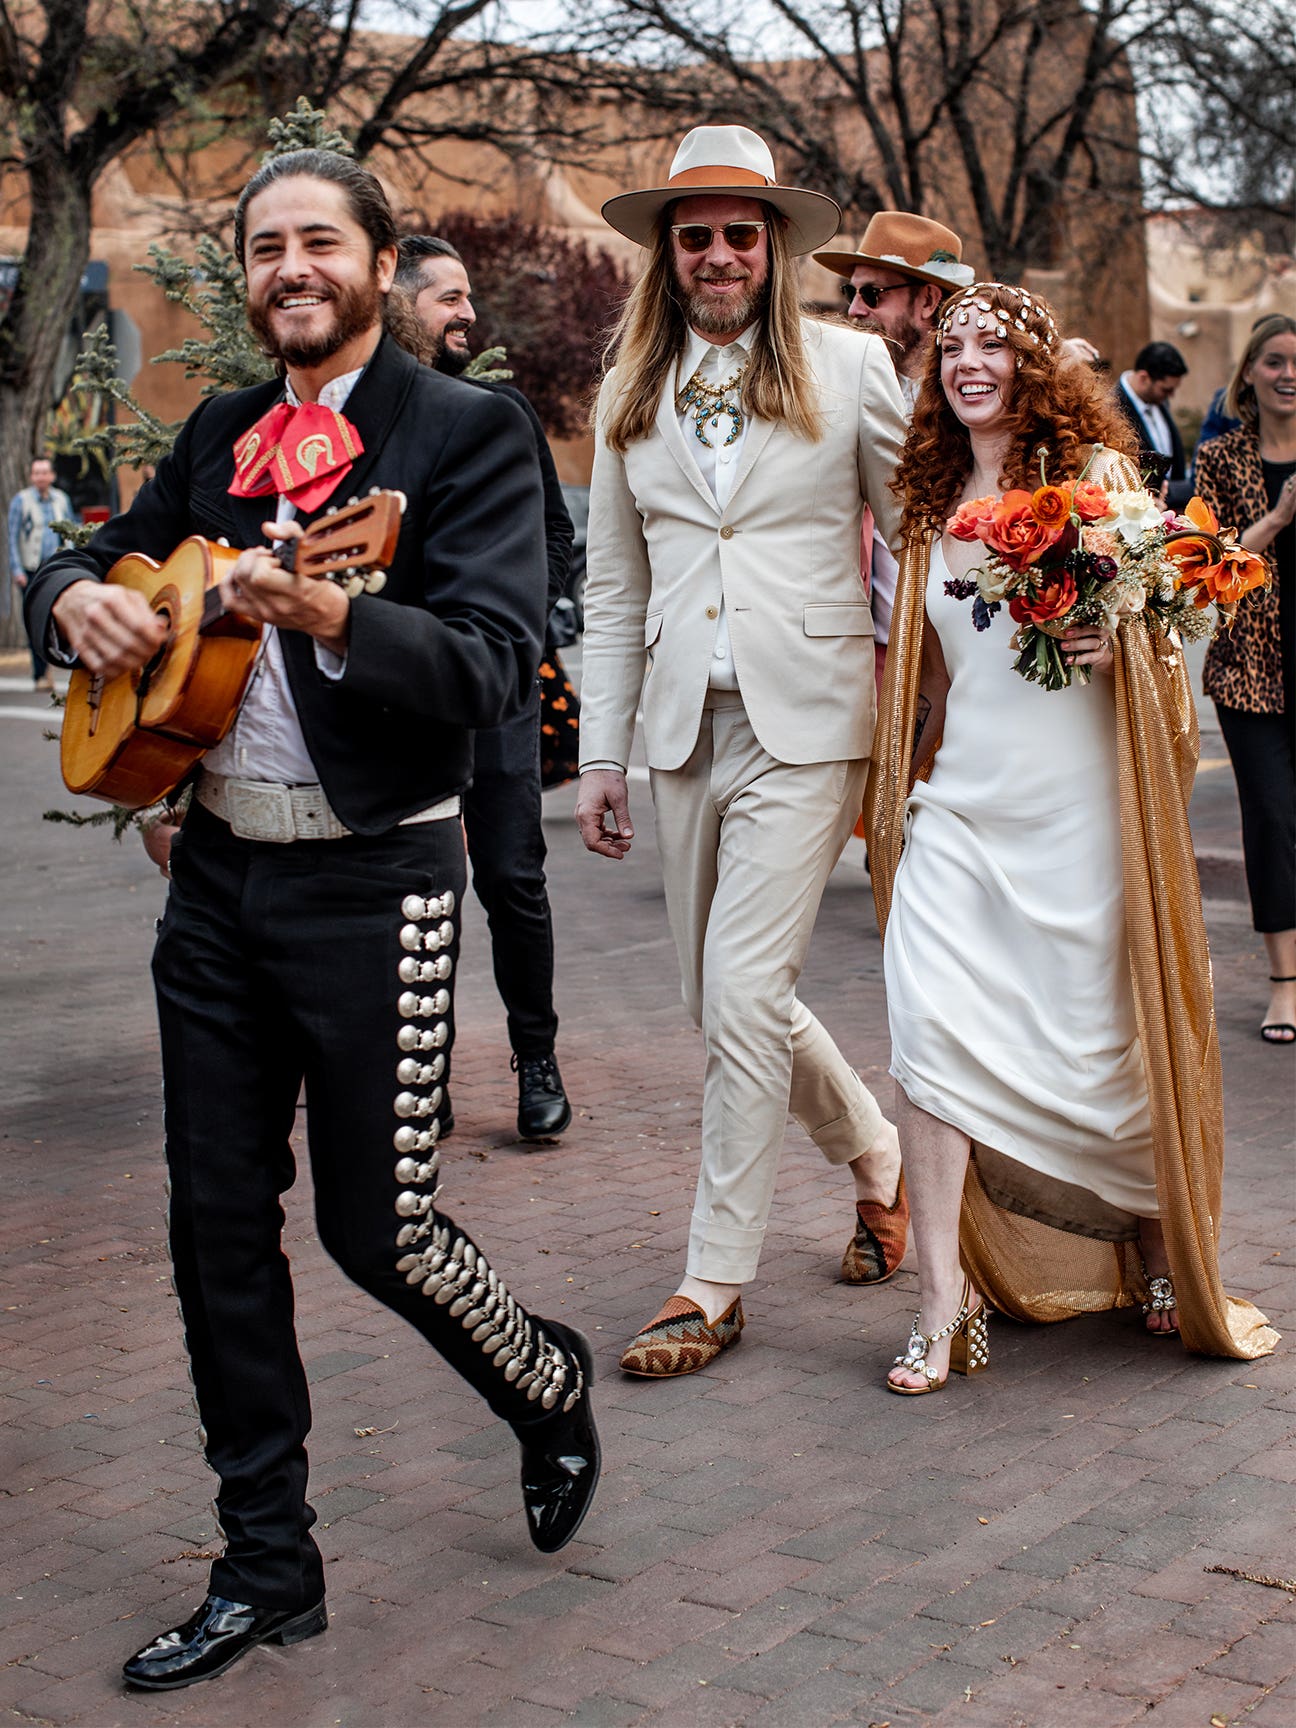 An Impromptu Mariachi Band Was Only the First Surprise at This Santa Fe Wedding